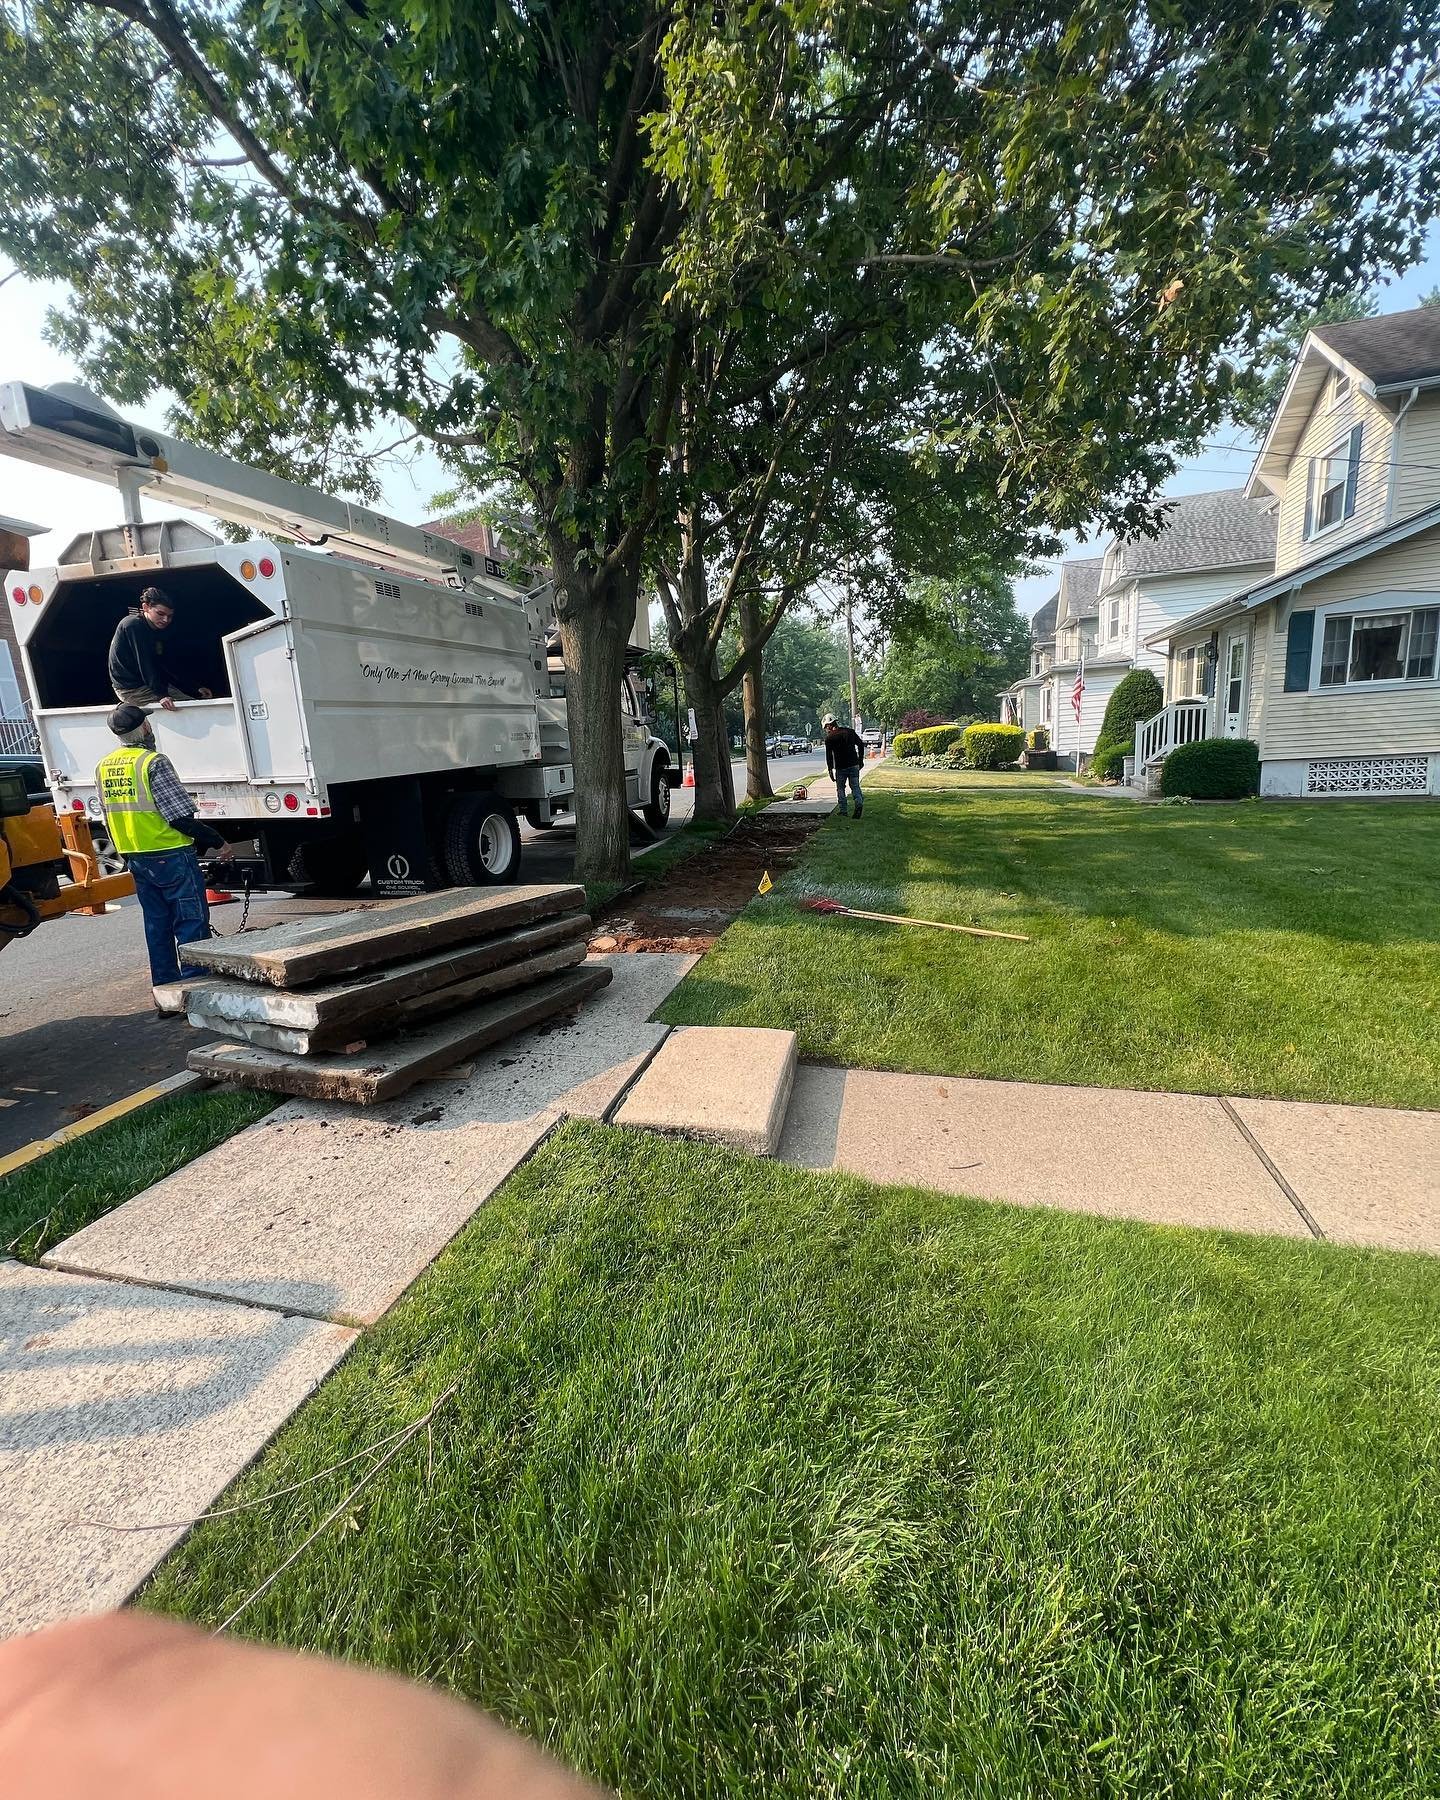 Sidewalks or big pavers? We cant figure it out.. Eitherway call us to avoid an insurance claim!! Lawsuits dont wait why should you? P.s. trees were harmed in these pictures..